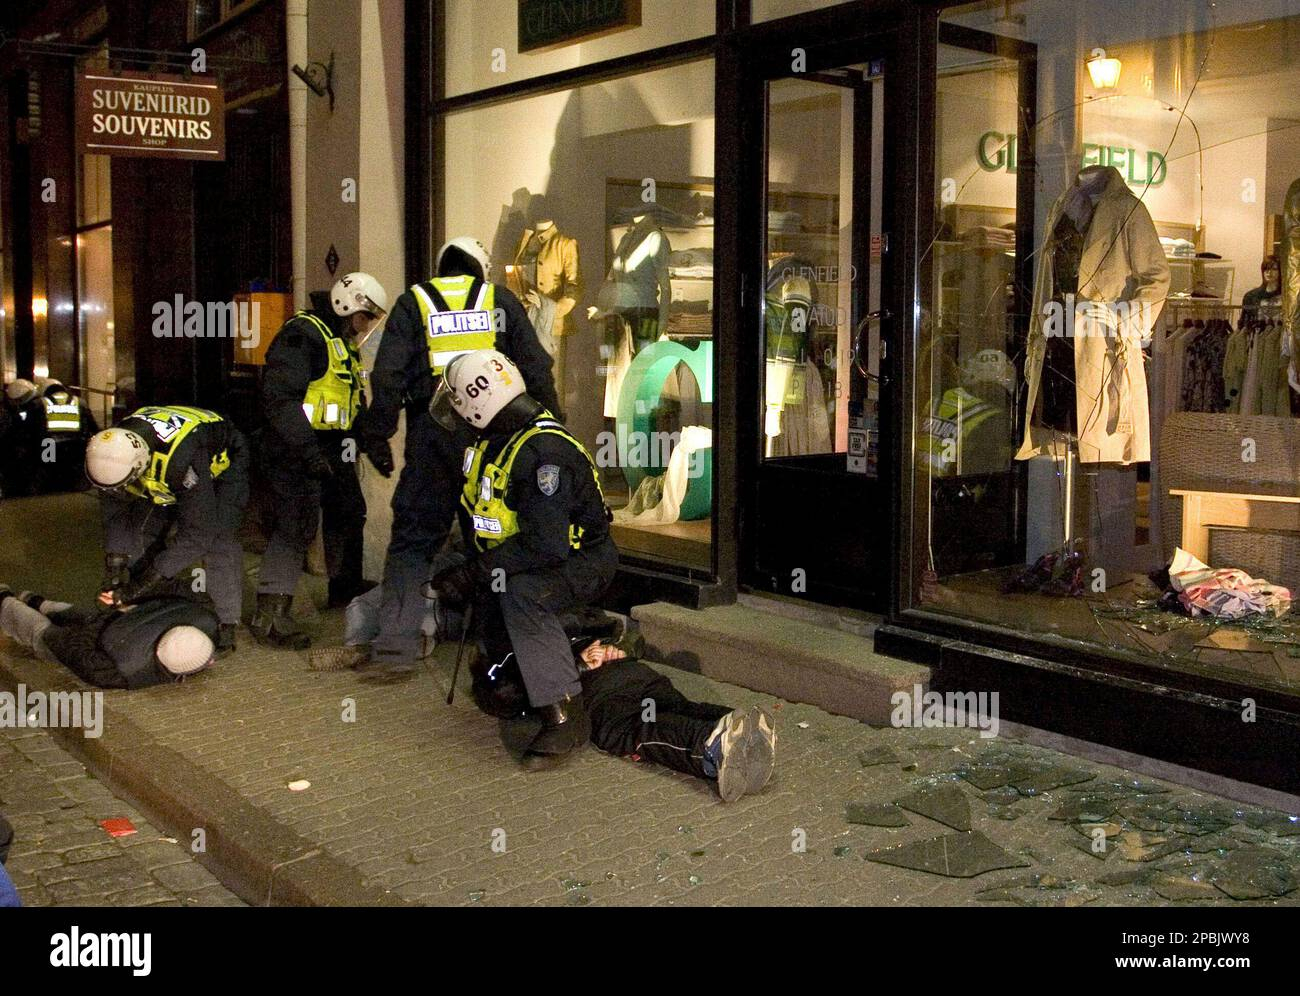 police-officers-in-riot-gear-detain-looters-in-central-tallinn-during-the-second-night-of-riot...jpg